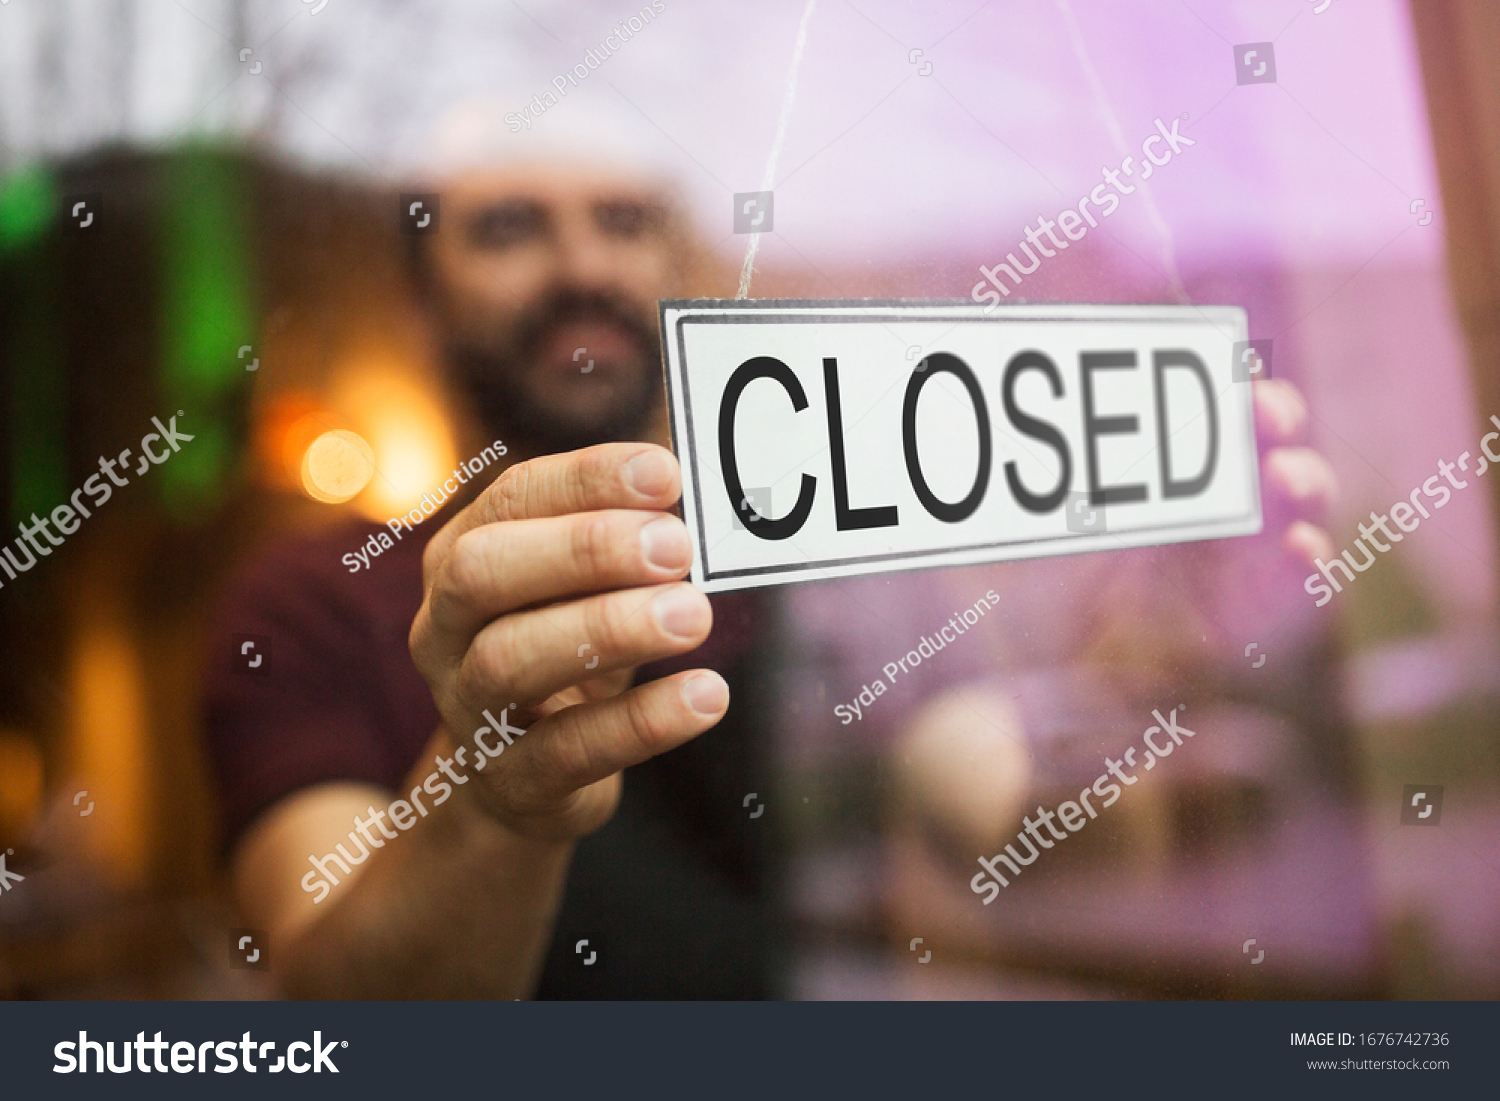 small business, people and crisis concept - owner puts closed sign at bar or restaurant glass door or window #1676742736